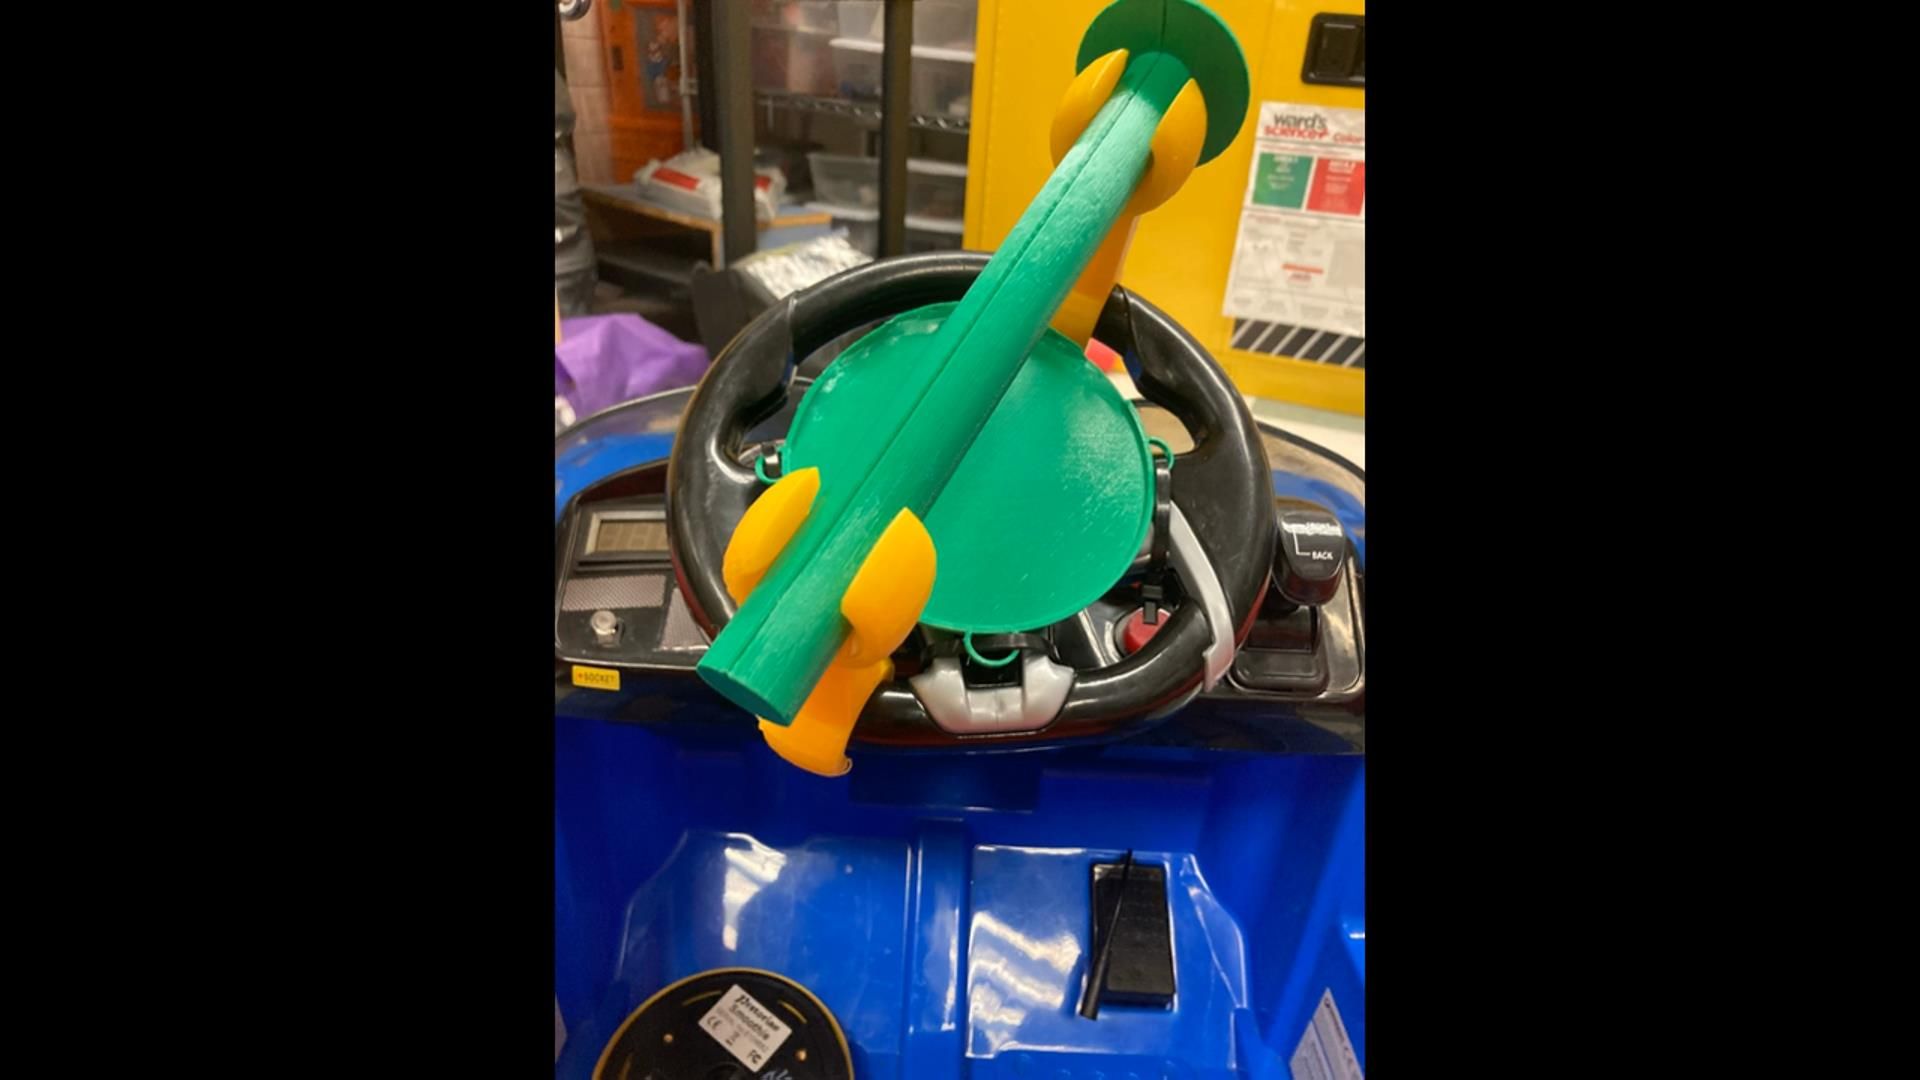 3D printed steering wheel attachment for a toy car.